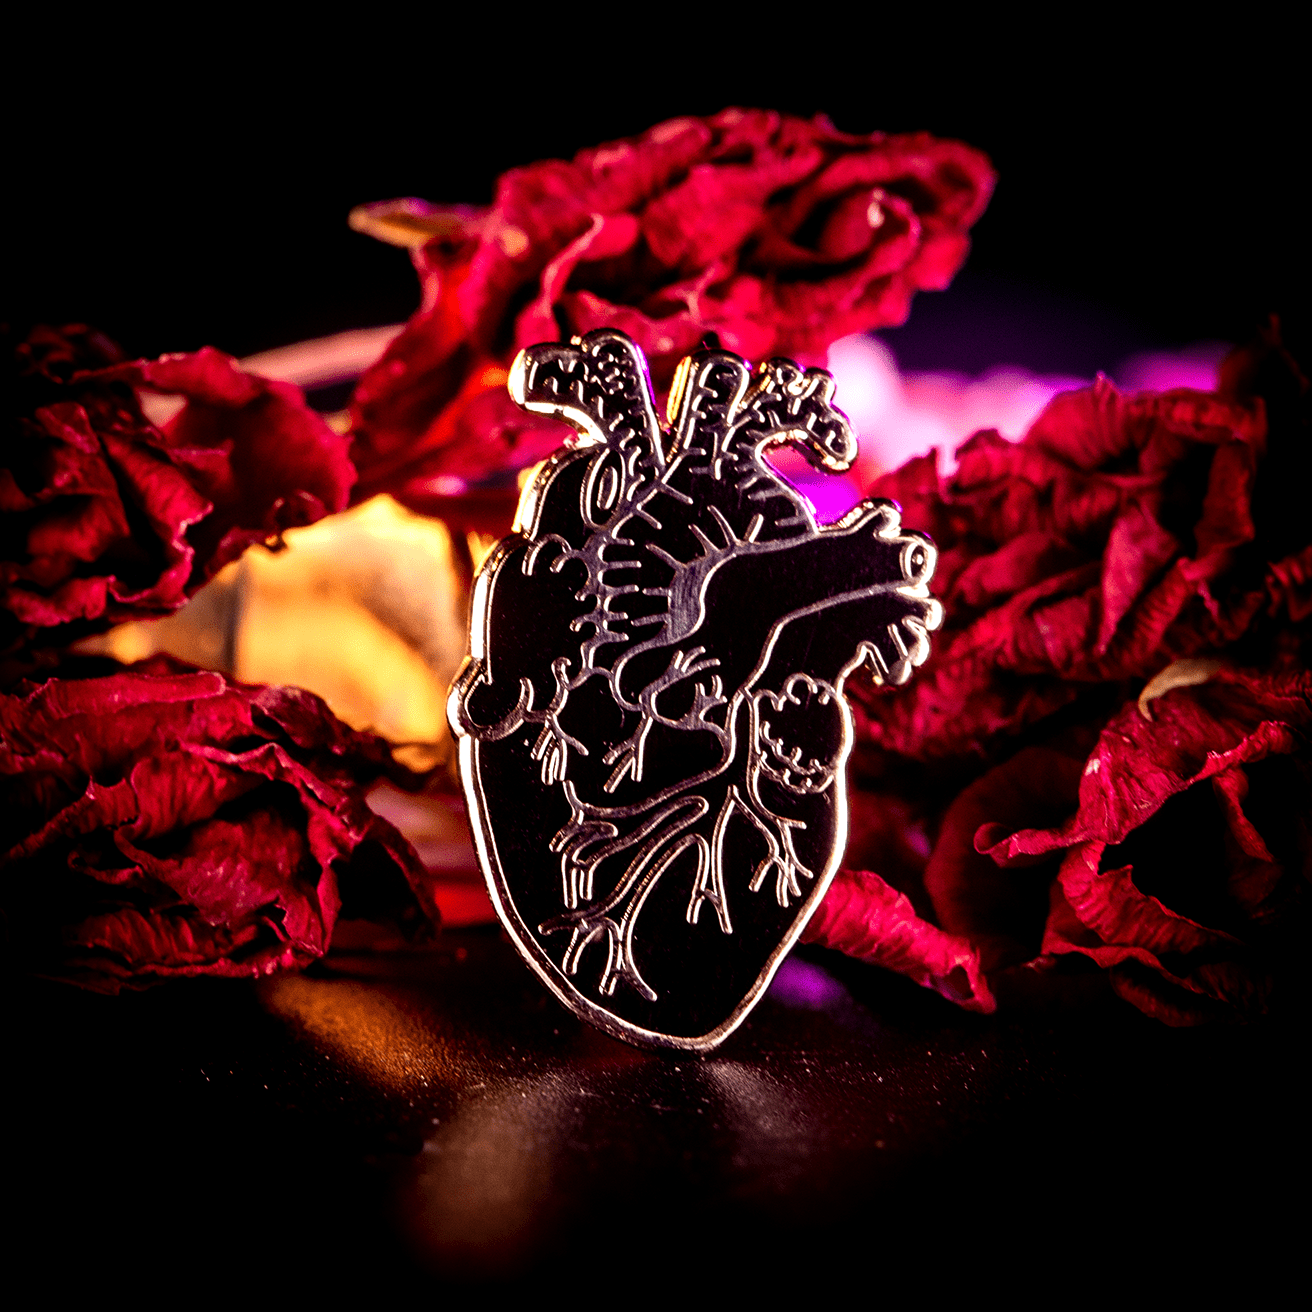 Black and silver anatomical heart enamel pin, goth style, by The Roving House